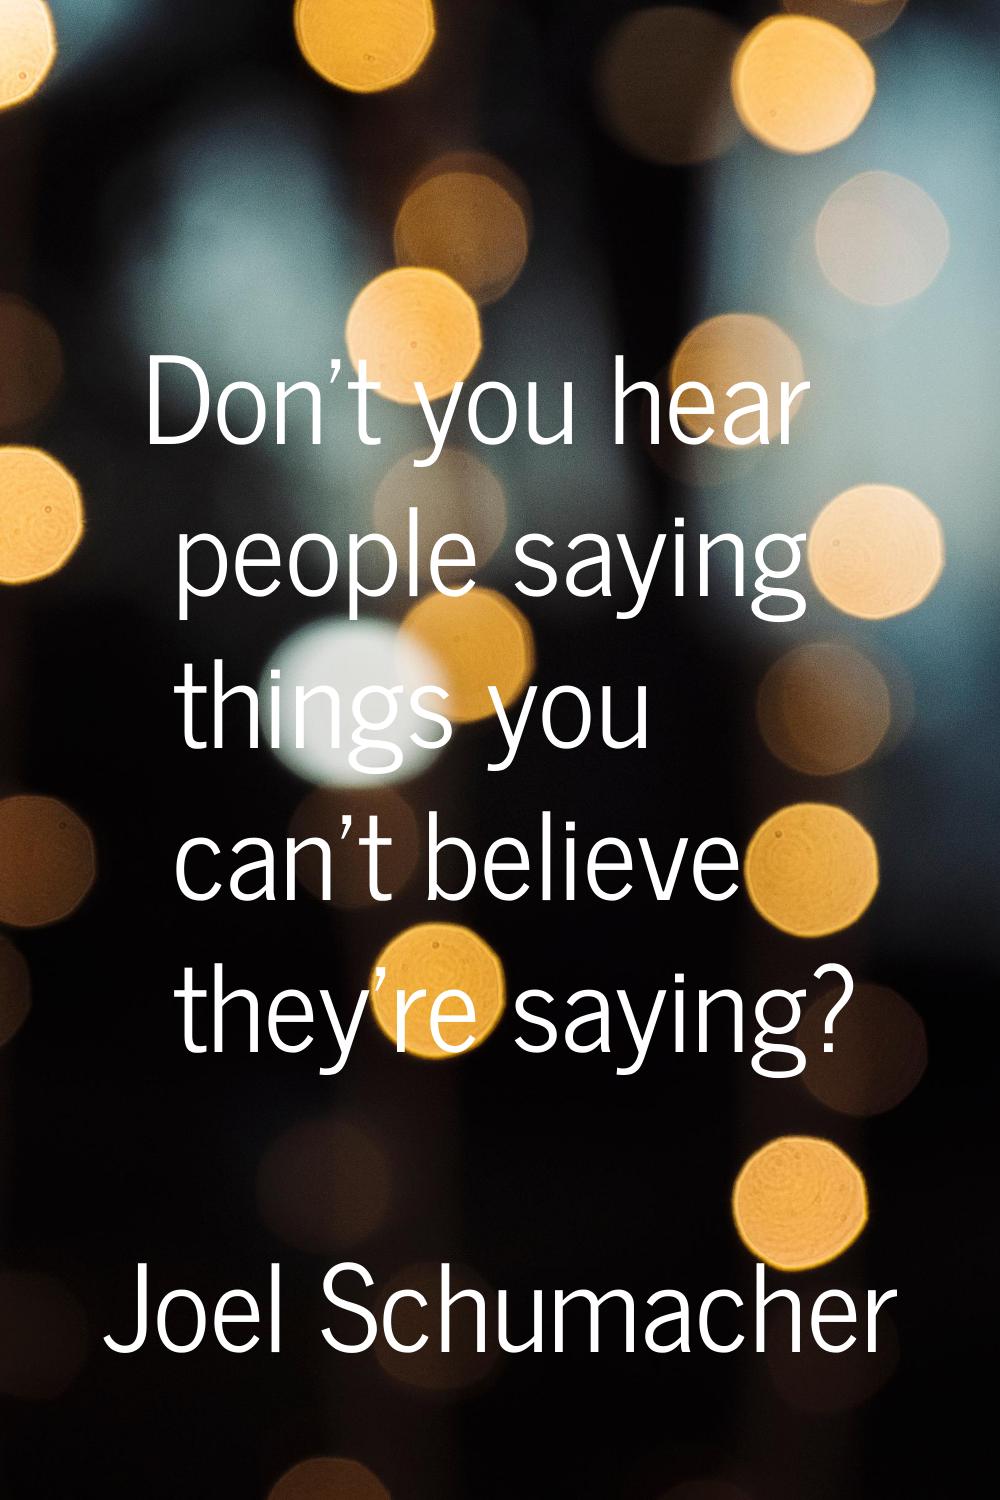 Don't you hear people saying things you can't believe they're saying?